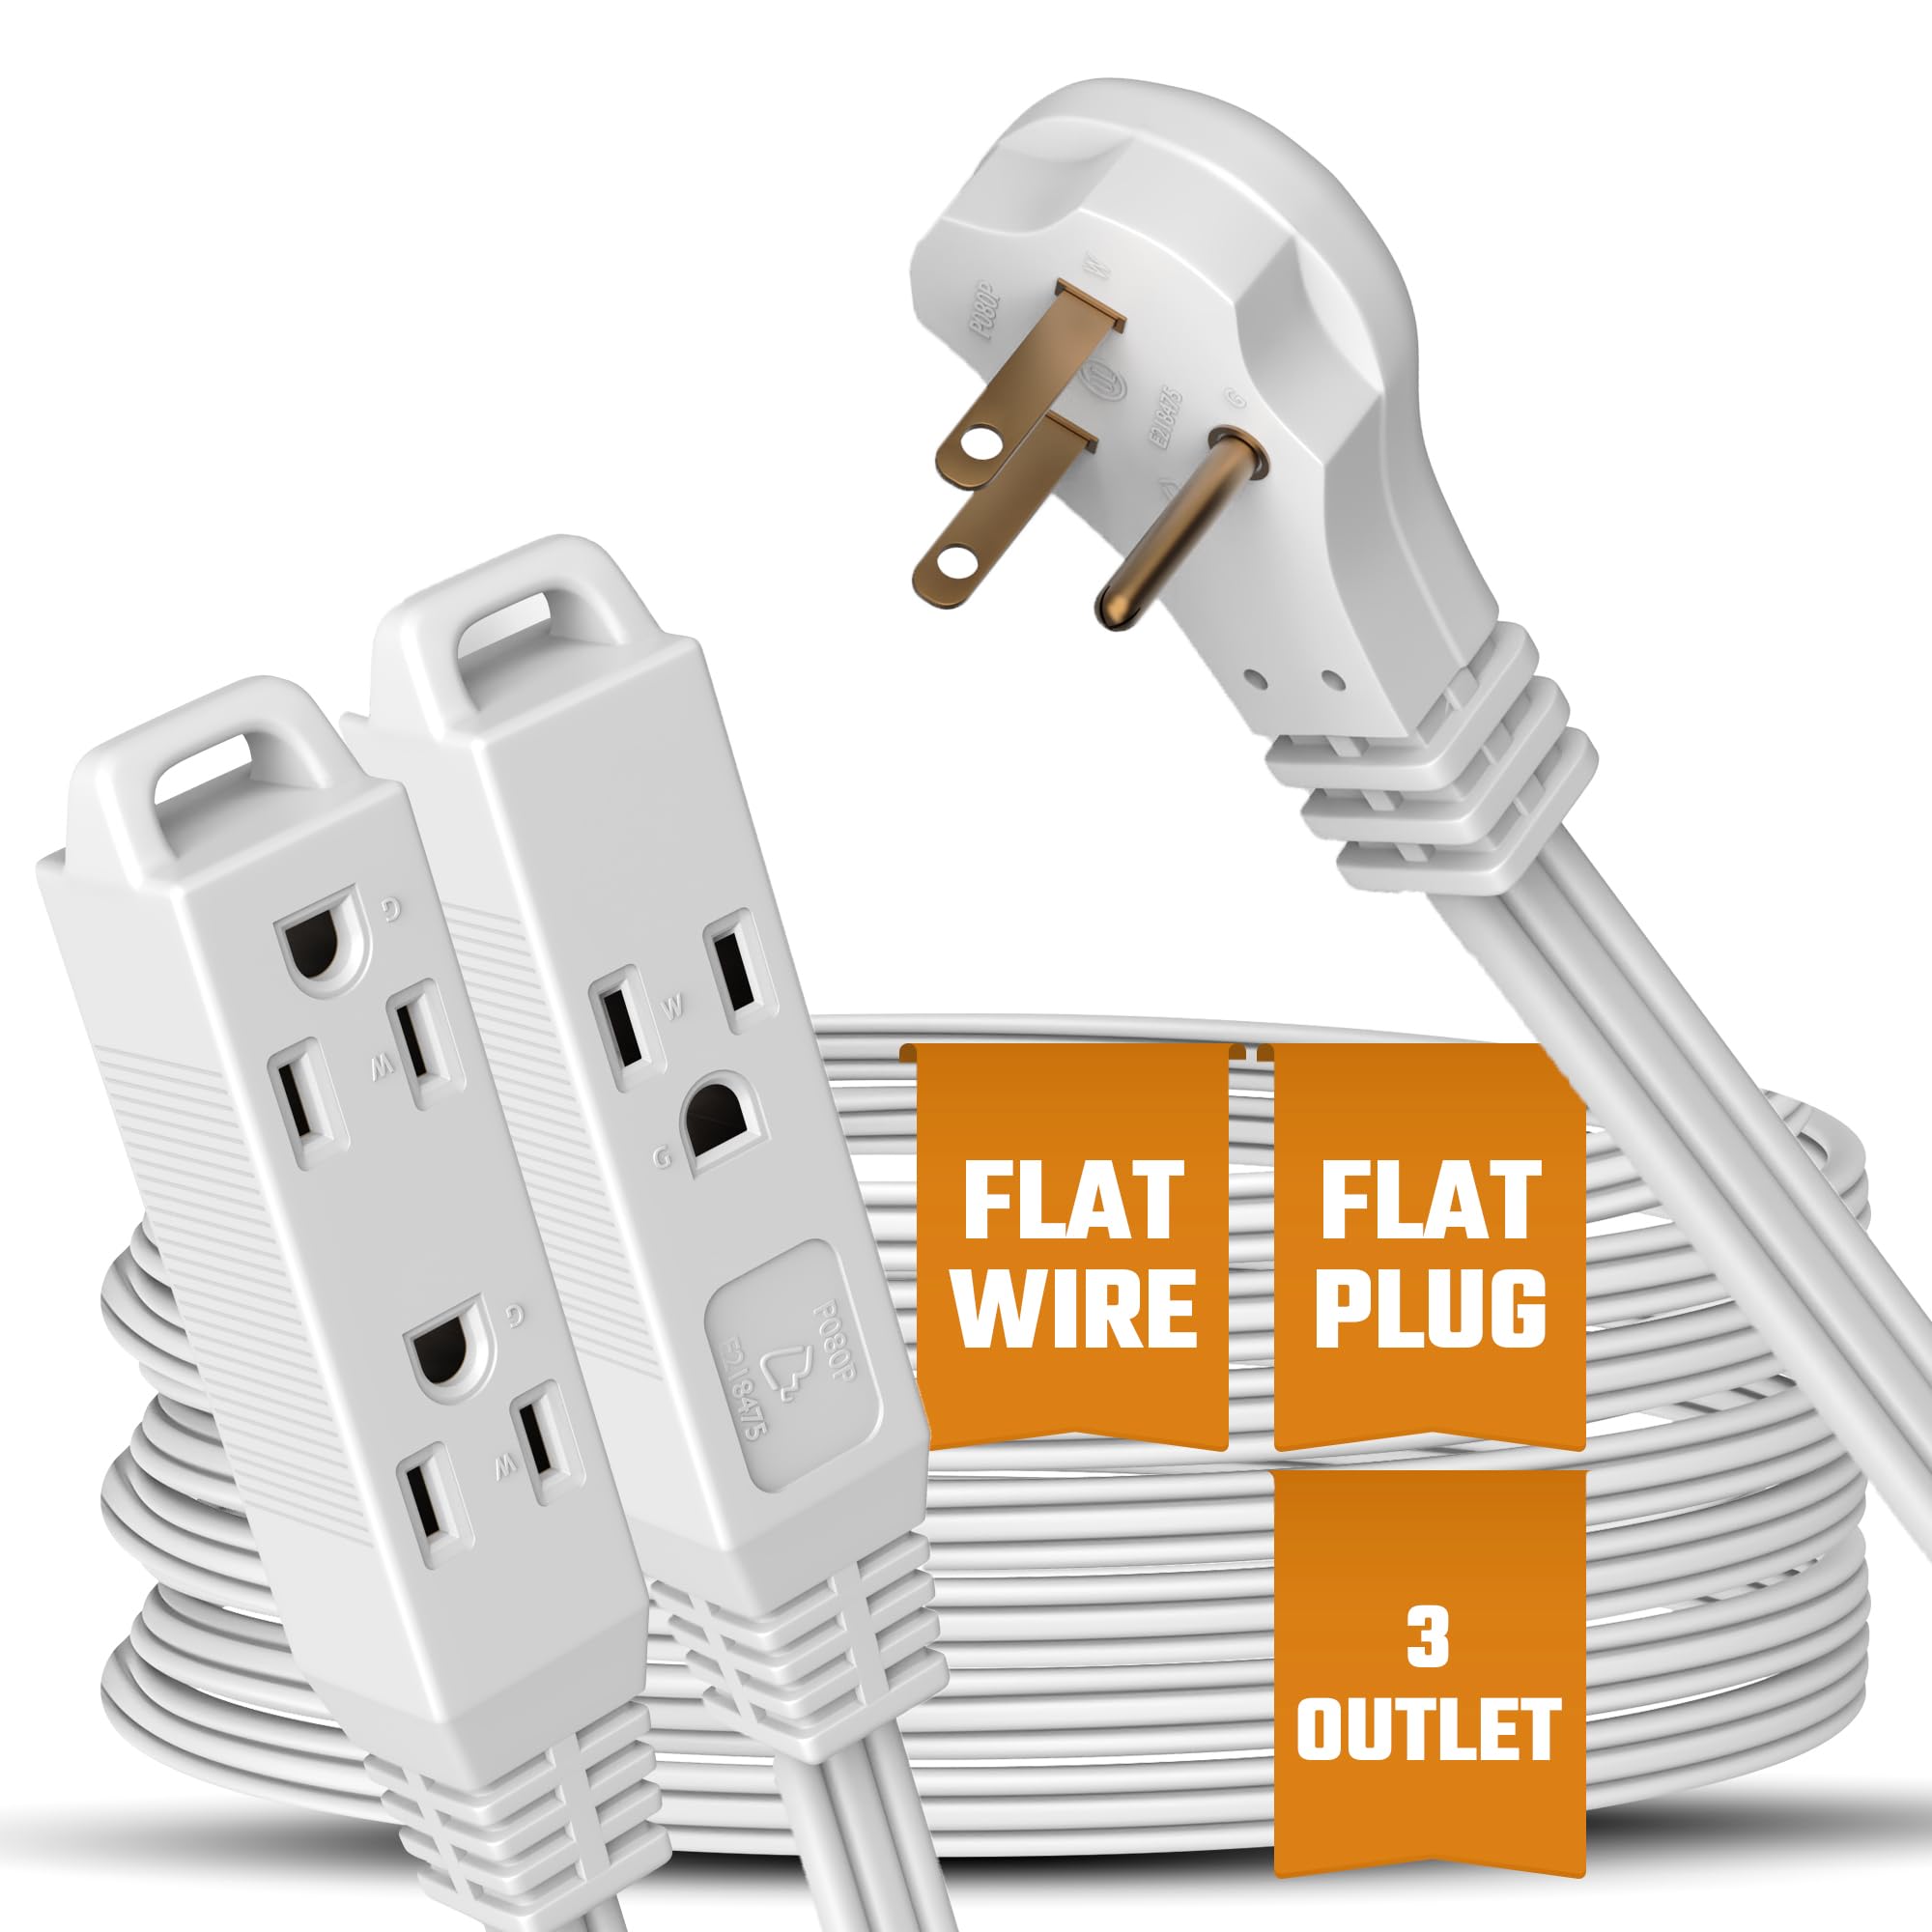 Flat 3-Outlet Extension Cord by Bindmaster- UL-Listed 3-Prong Multi Extension Wire- Space-Saving Flat Angled Extension Cord  - Very Good